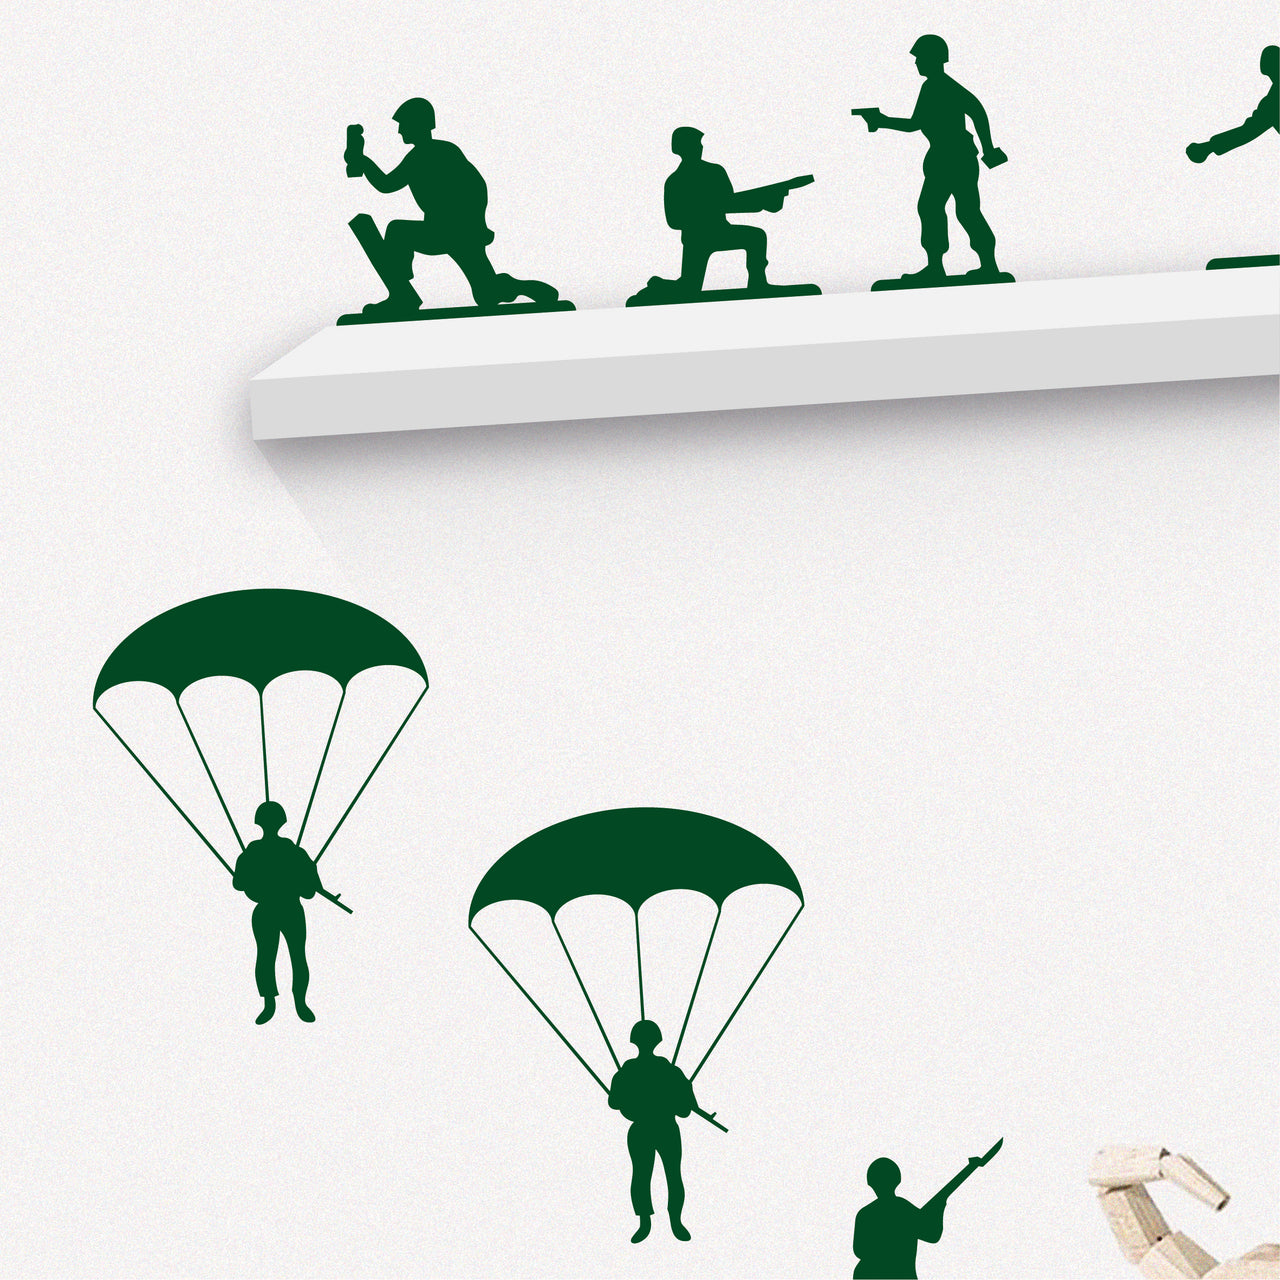 Army Toy Soldiers Wall Decal Set